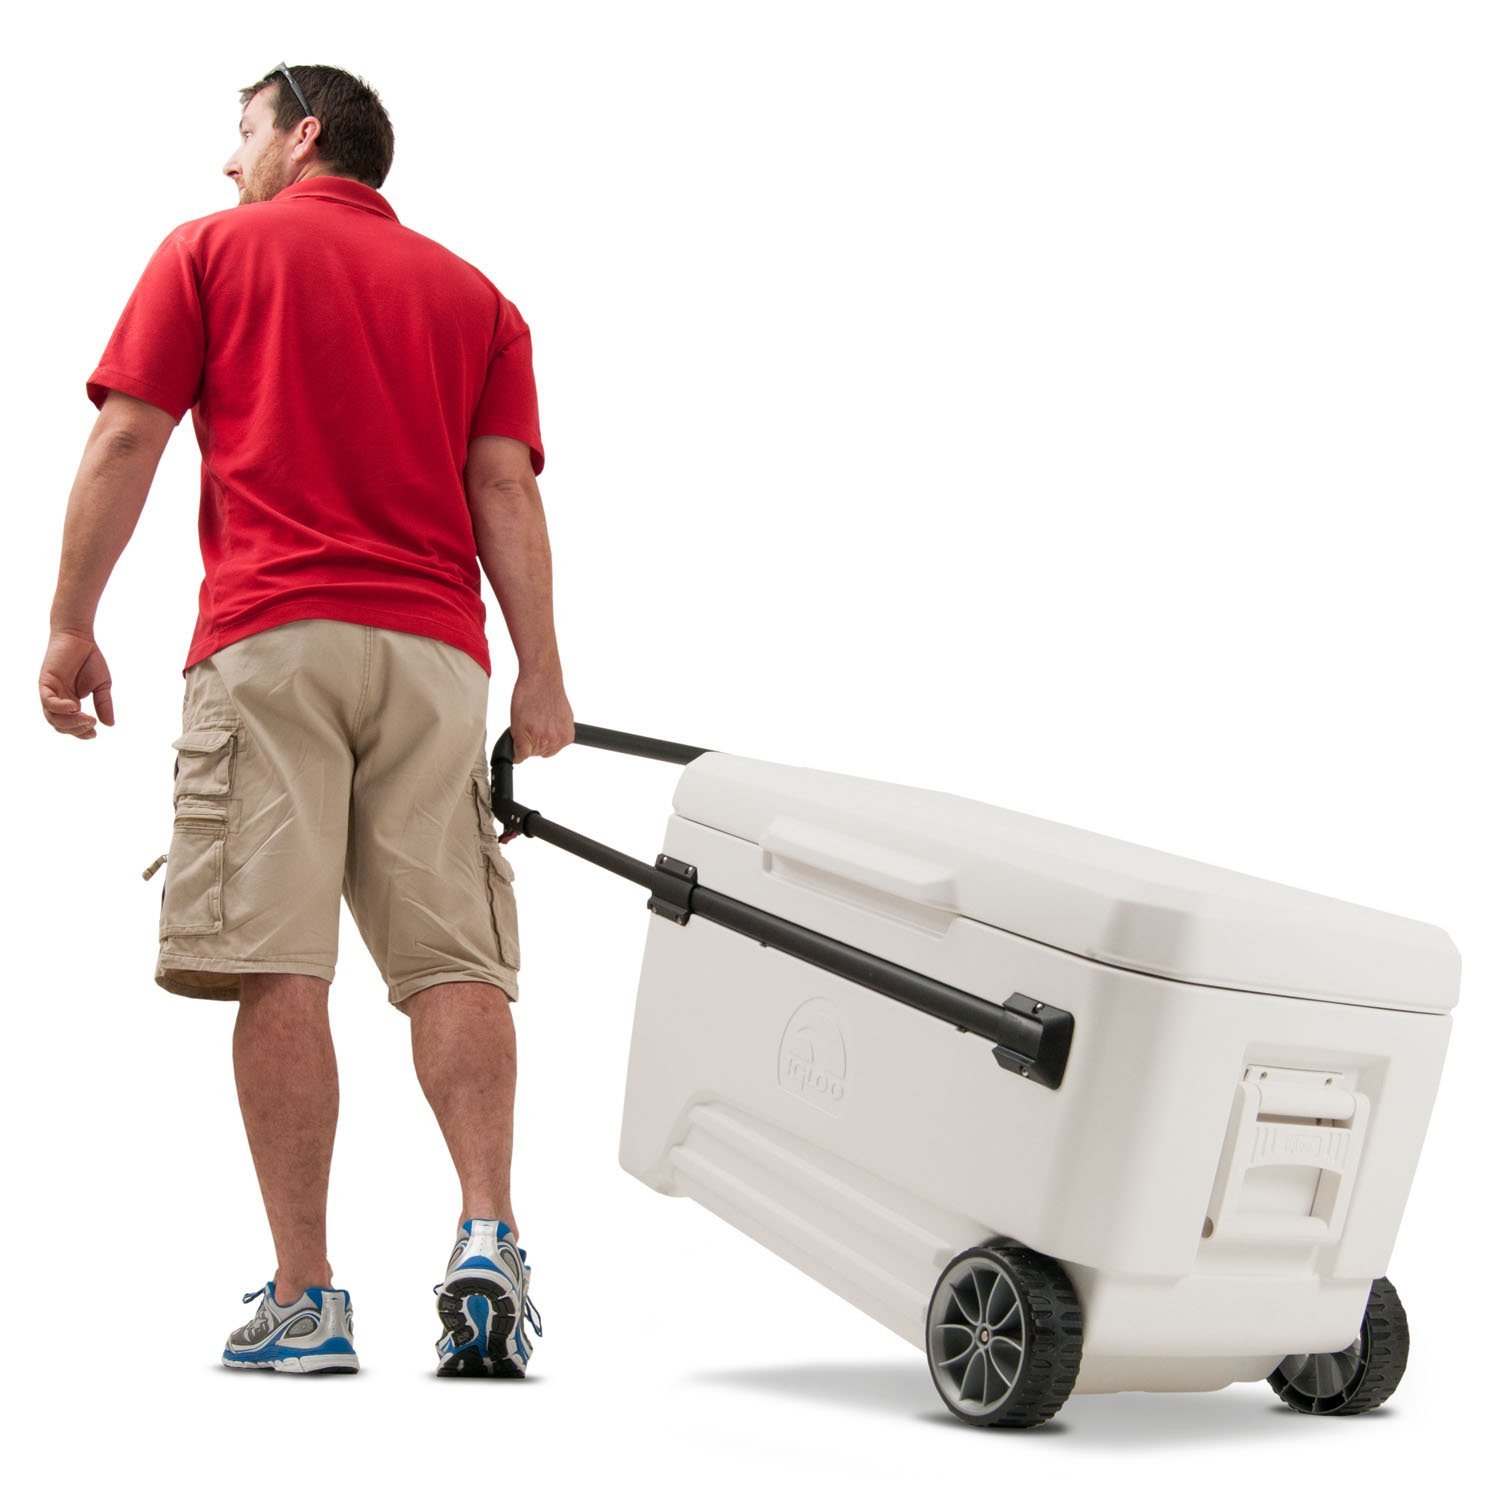 COOLER ICE CHEST WITH WHEELS CAMPING GEAR TRAVEL ROLLING HARD COLEMAN COOLERS ~~